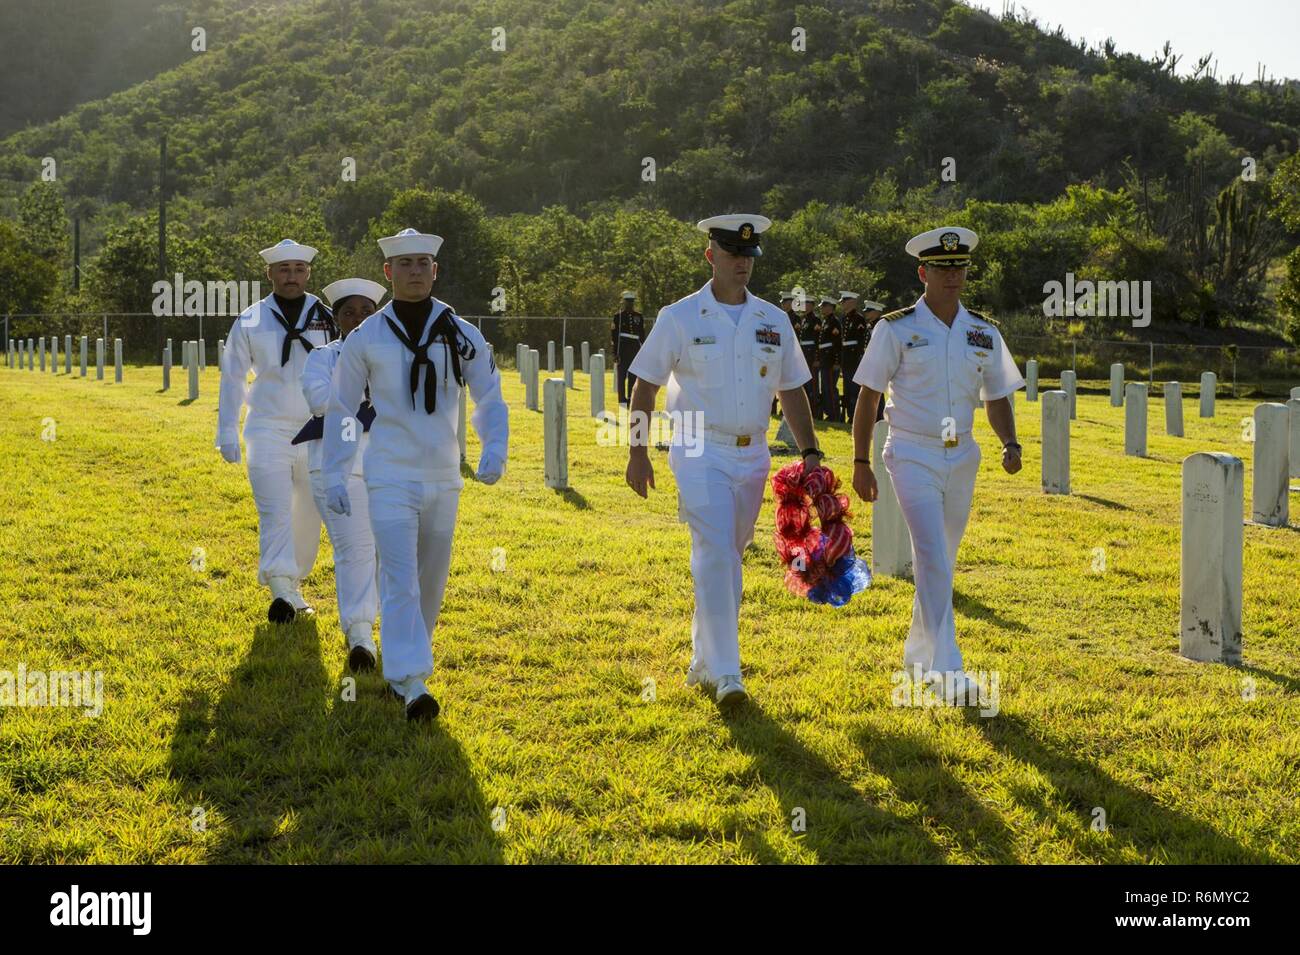 Naval Station Guantanamo Bay, Cuba (May 29, 2016)-Naval Station Guantanamo Bay’s Commanding Office Capt. David Culpepper and Command Master Chief Thomas Mace lay a wreath at Cuzco Wells Cemetery during a Memorial Day Ceremony Service. Capt. Culpepper Culpepper highlighted the brave Marines that died during the Battle of Cuzco Well during the Spanish American War. NSGB provides support to the U.S. Navy and U.S. Coast Guard vessels, and partner navies in the Caribbean operating area Stock Photo